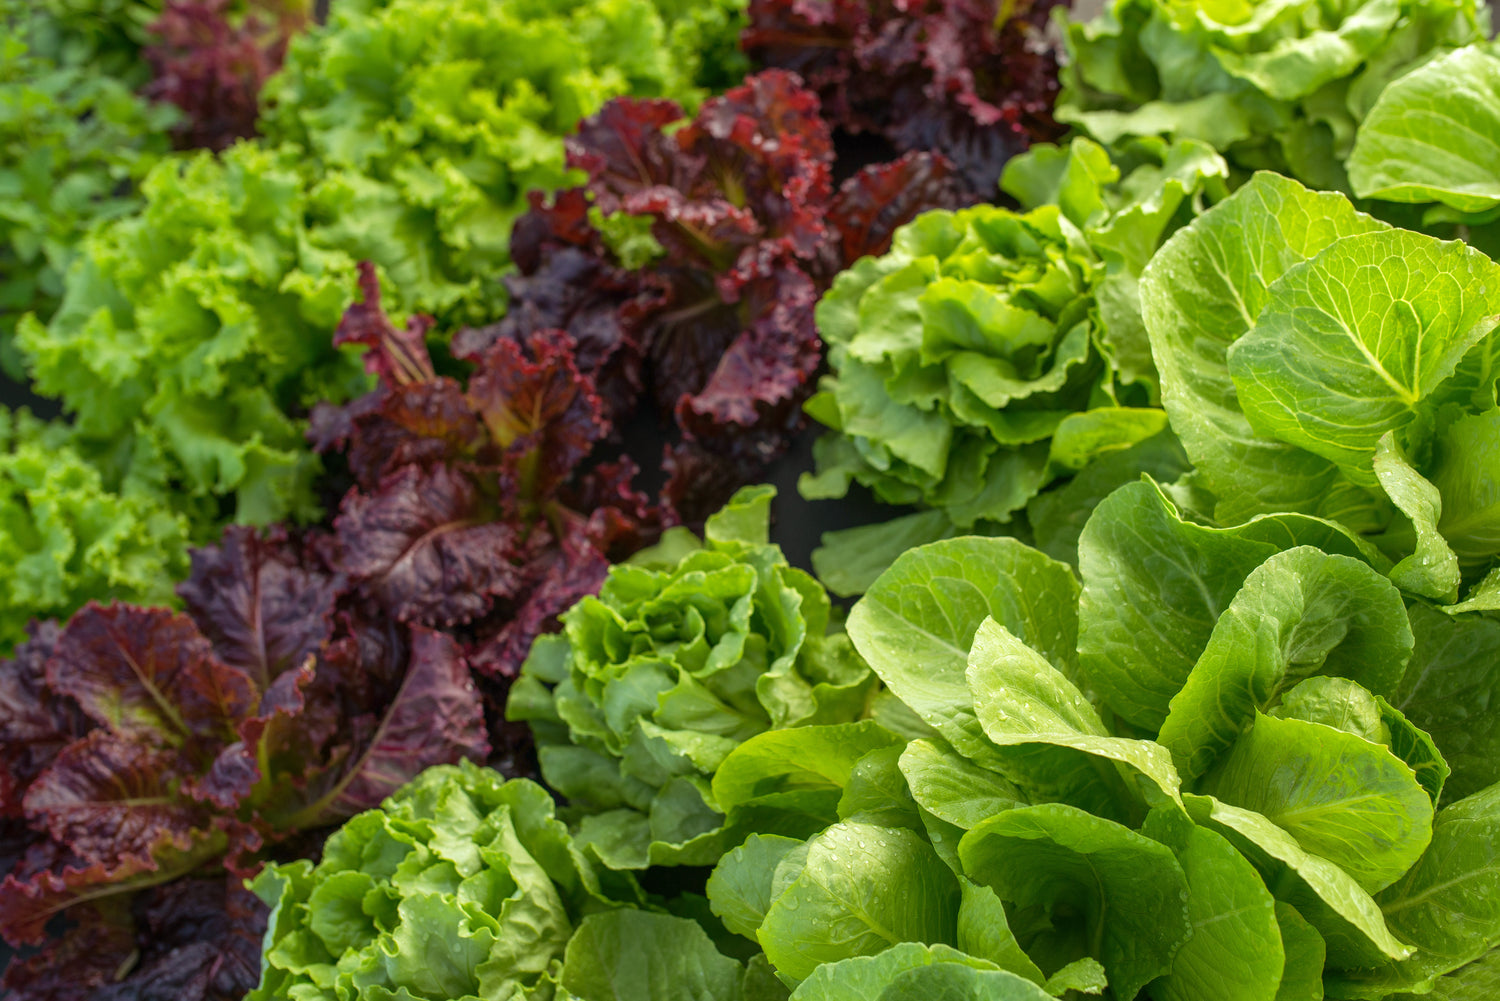 Variety of lettuce plans lined up while growing in a garden